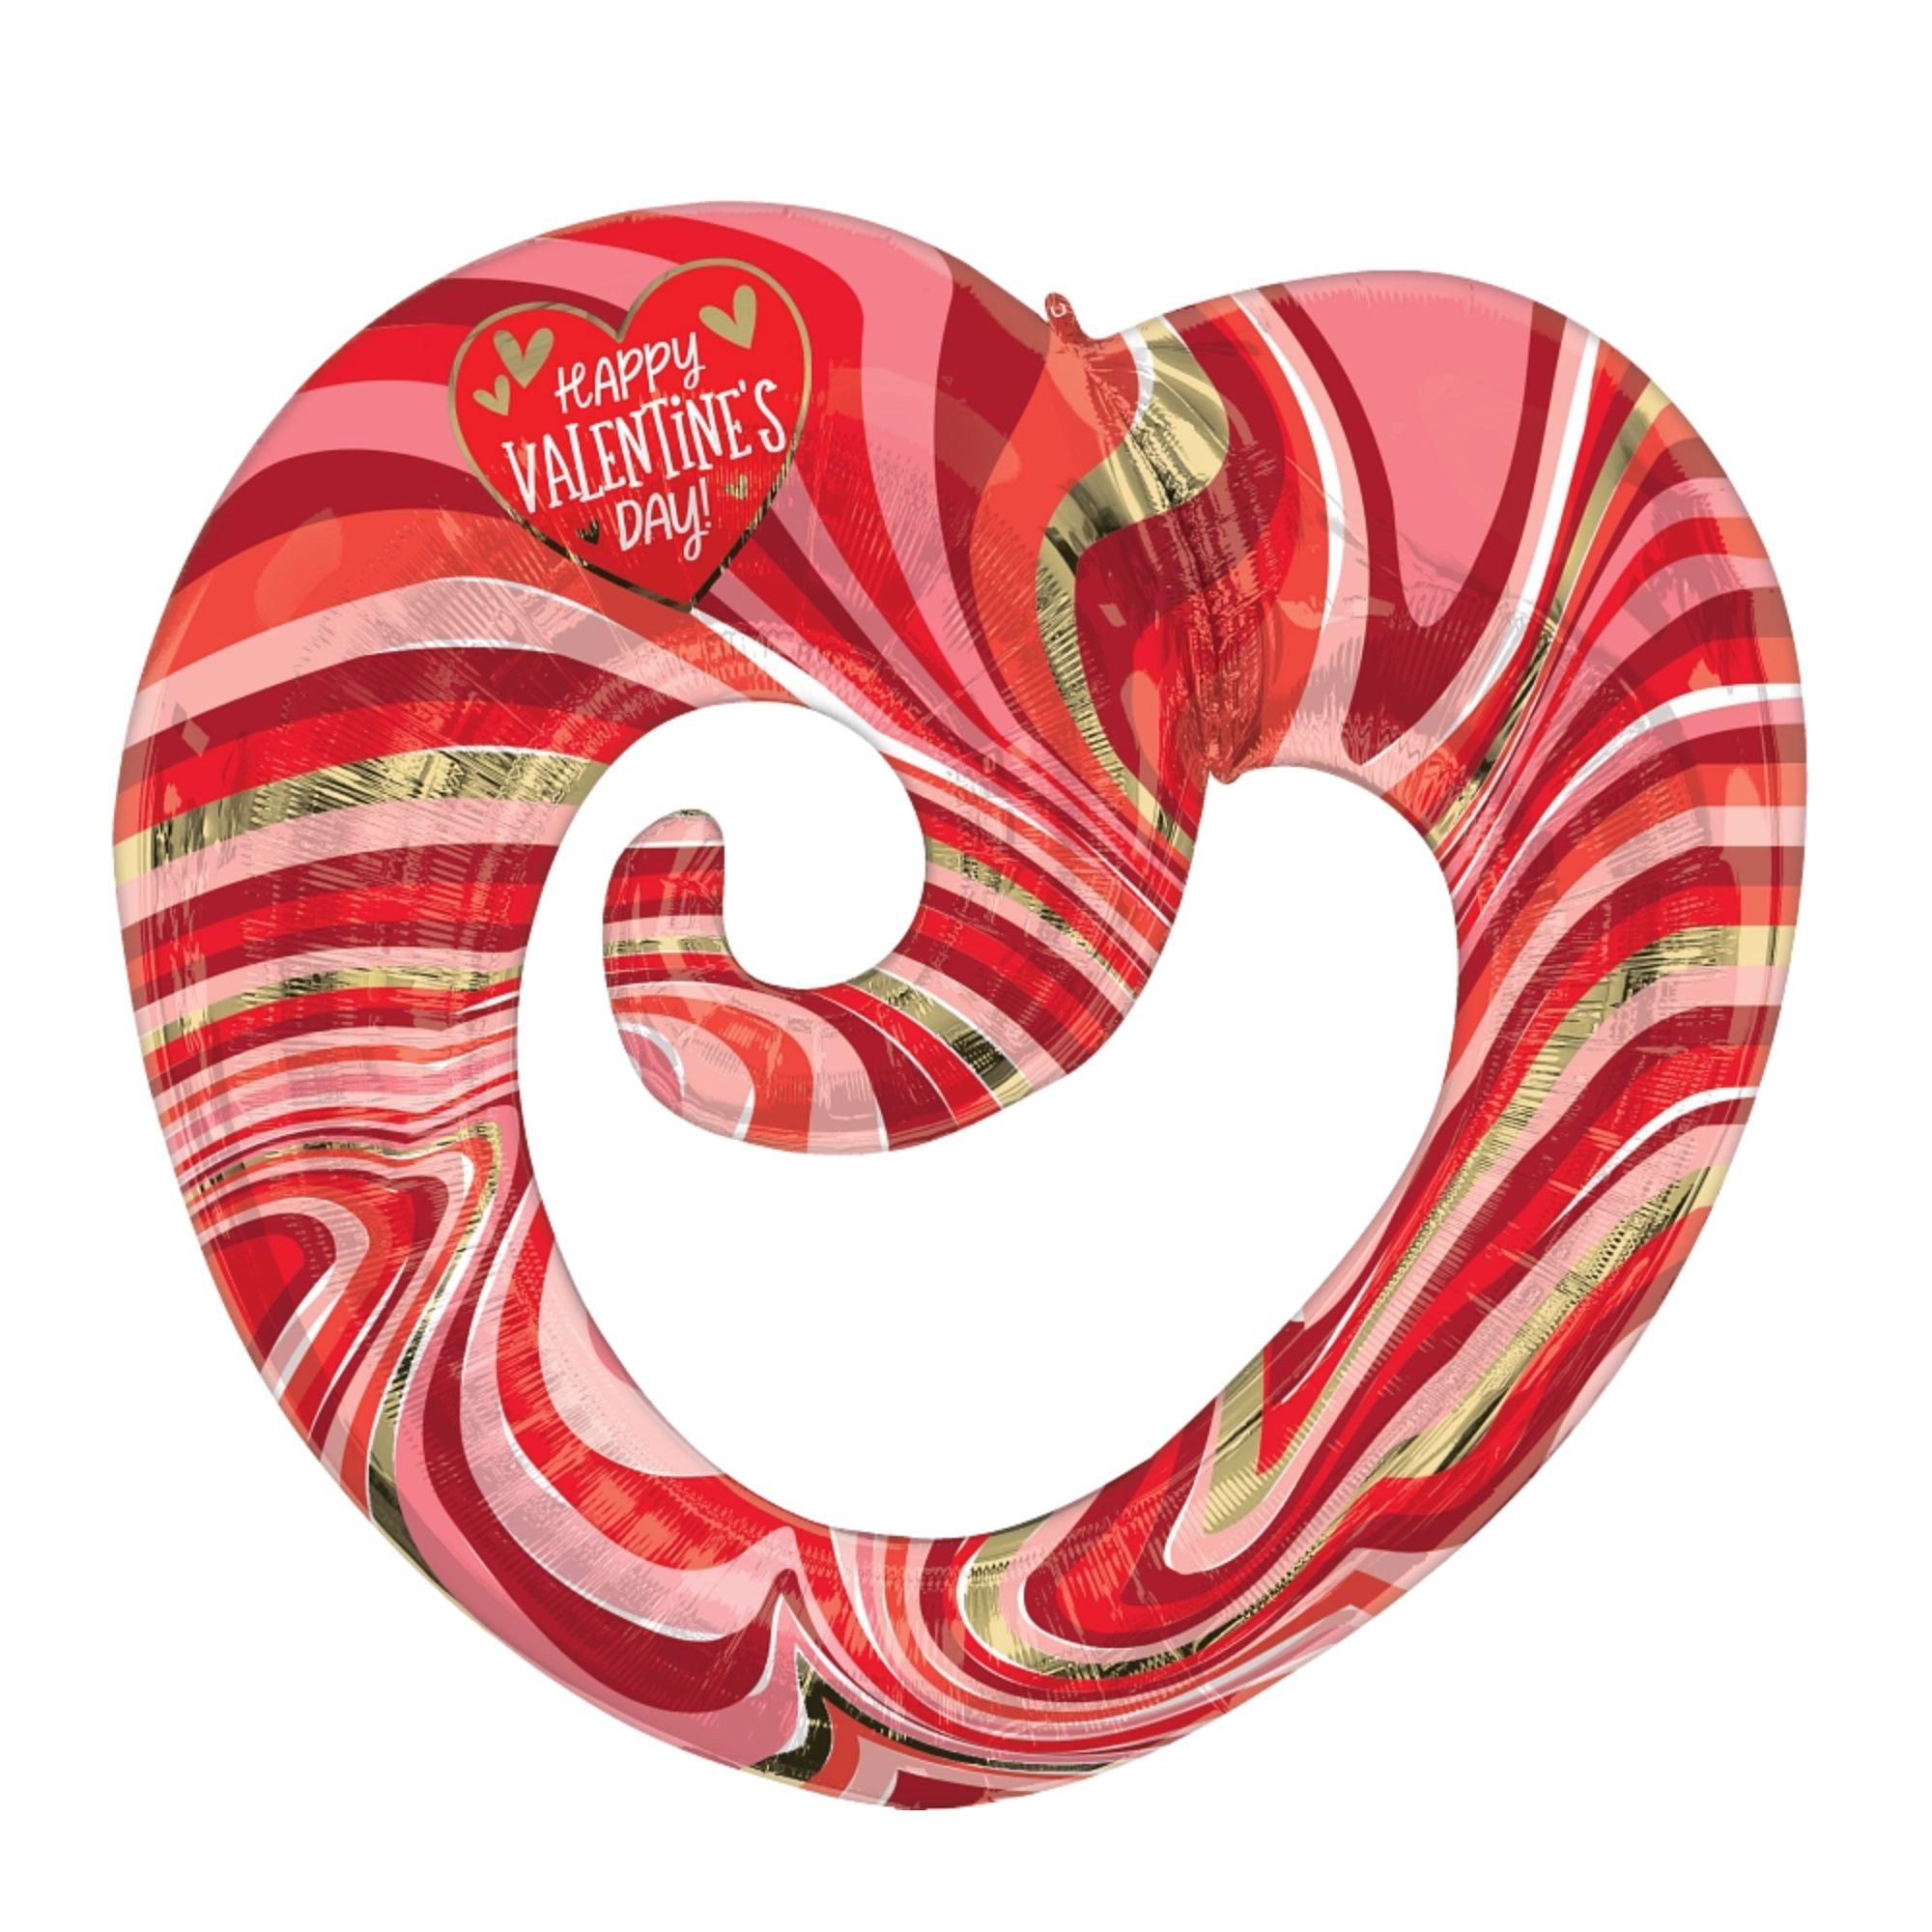 Happy Valentines Day Marble Twisty Heart Supershape Foil Balloon